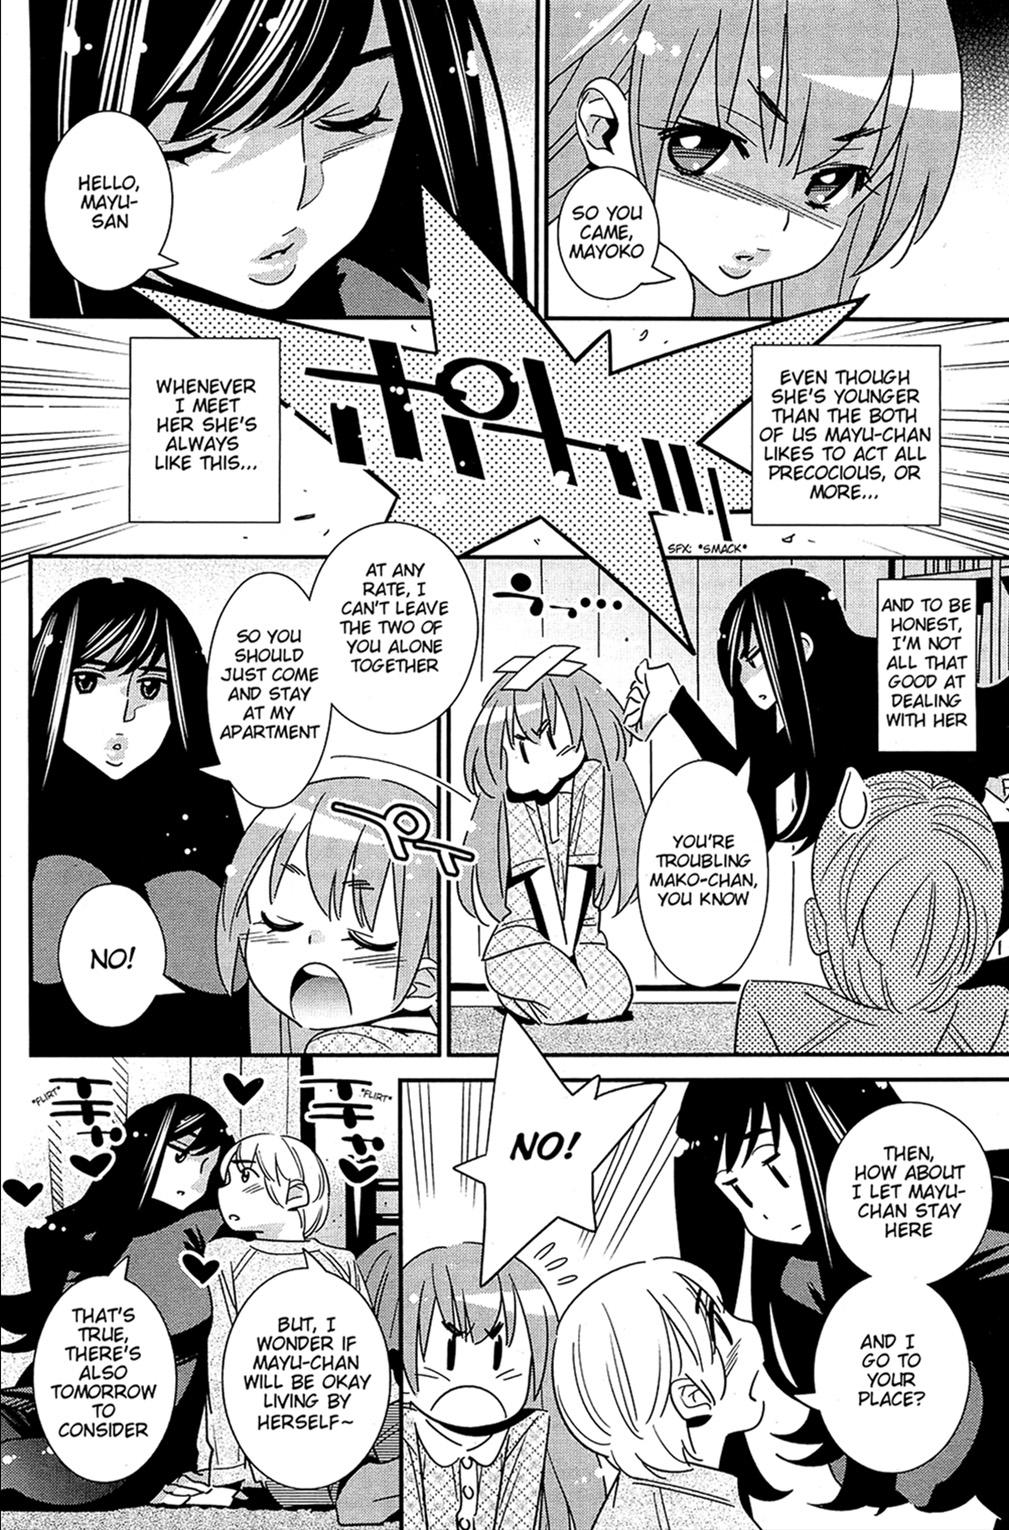 Doll Boku no Haigorei? | The Ghost Behind My Back? Perverted - Page 10